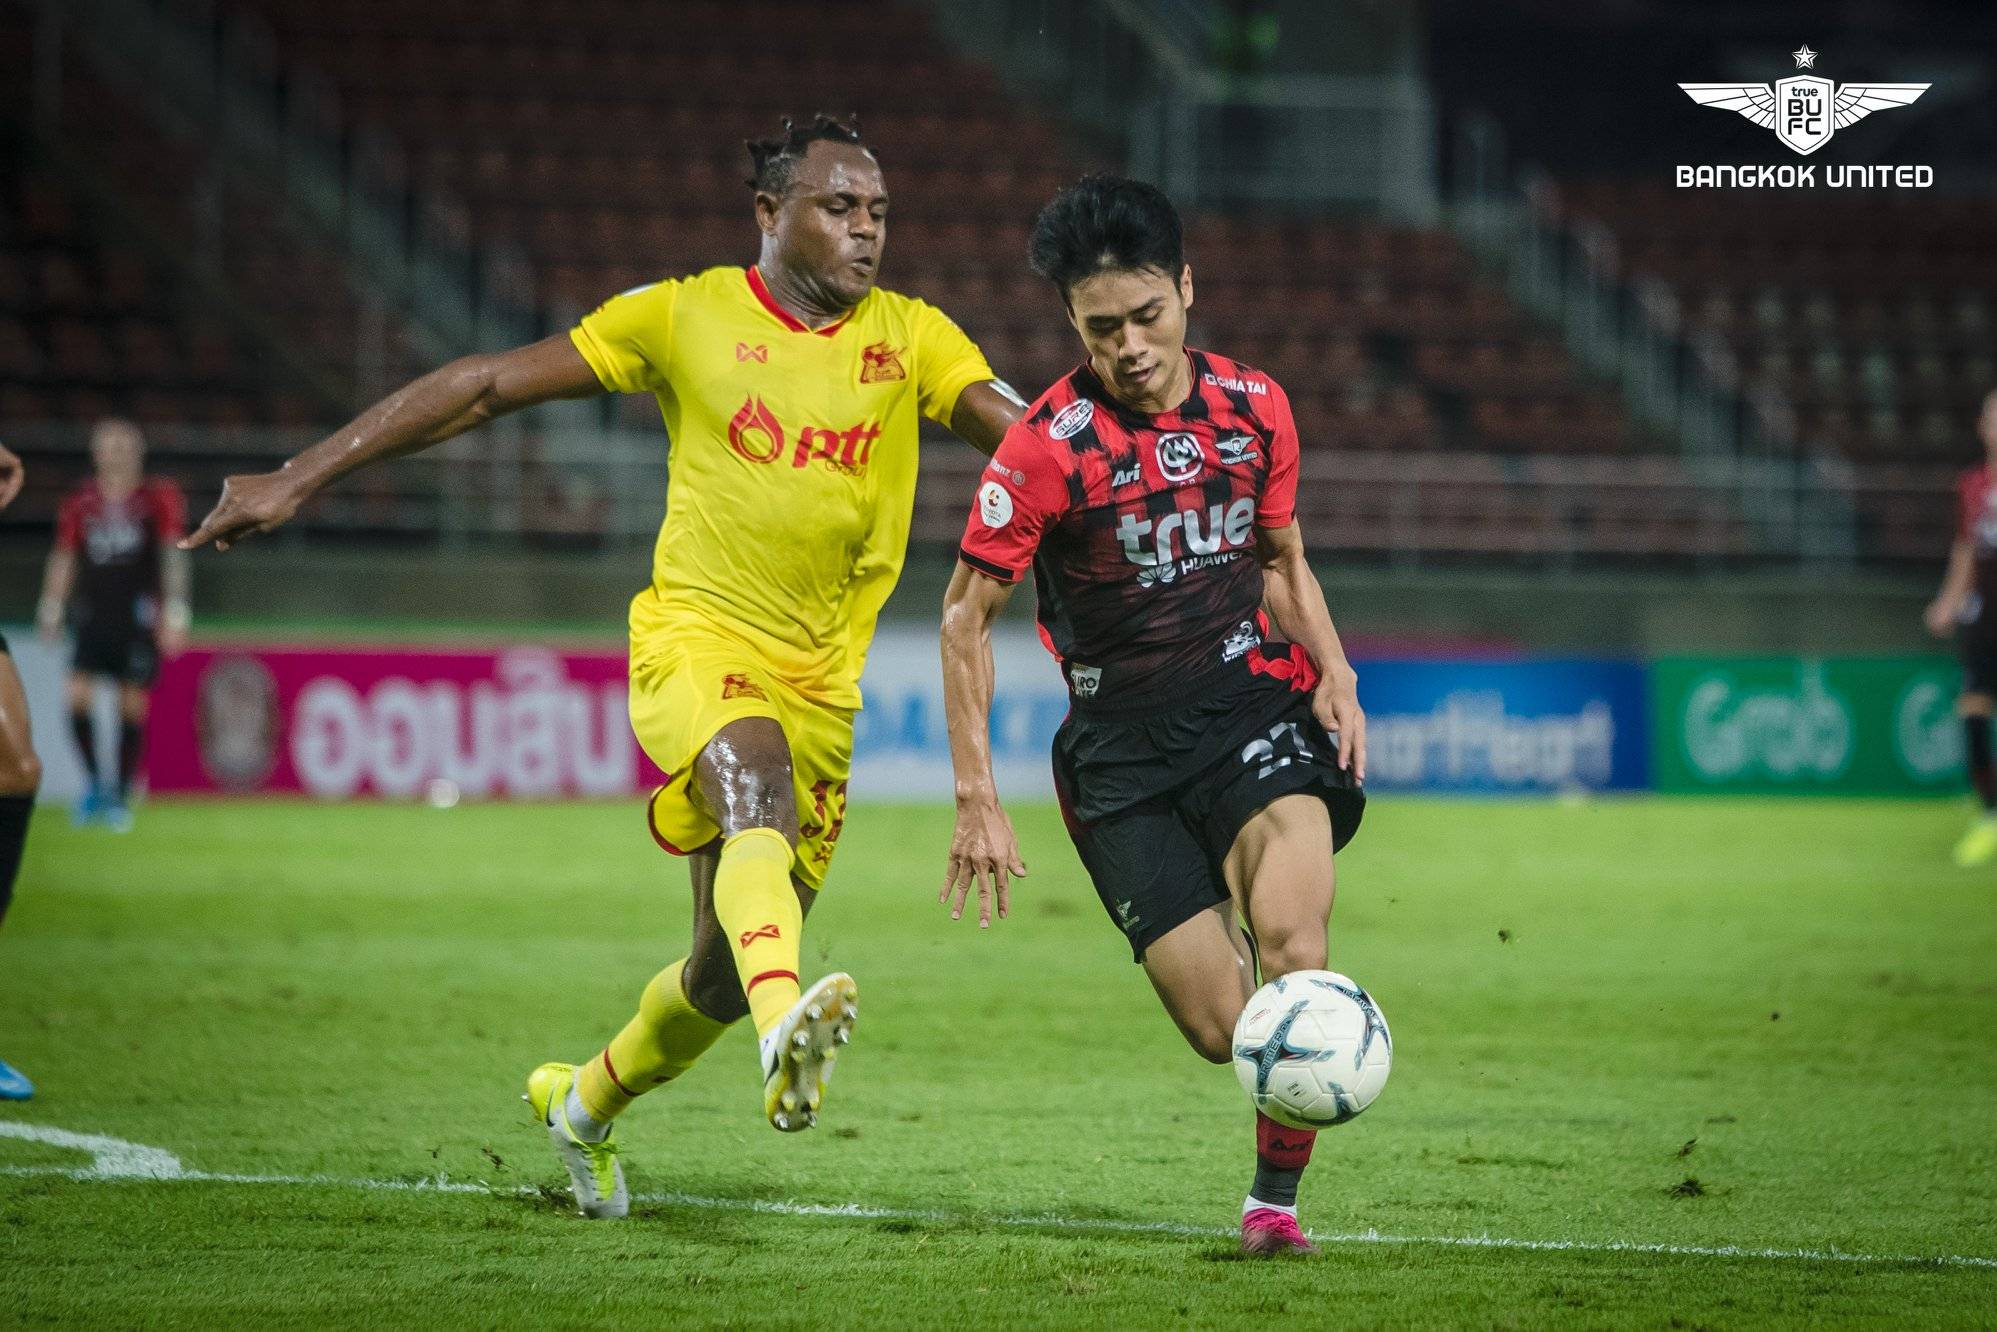 Bangkok United’s Anon Amornlerdsak Could be Next to Join FC Tokyo